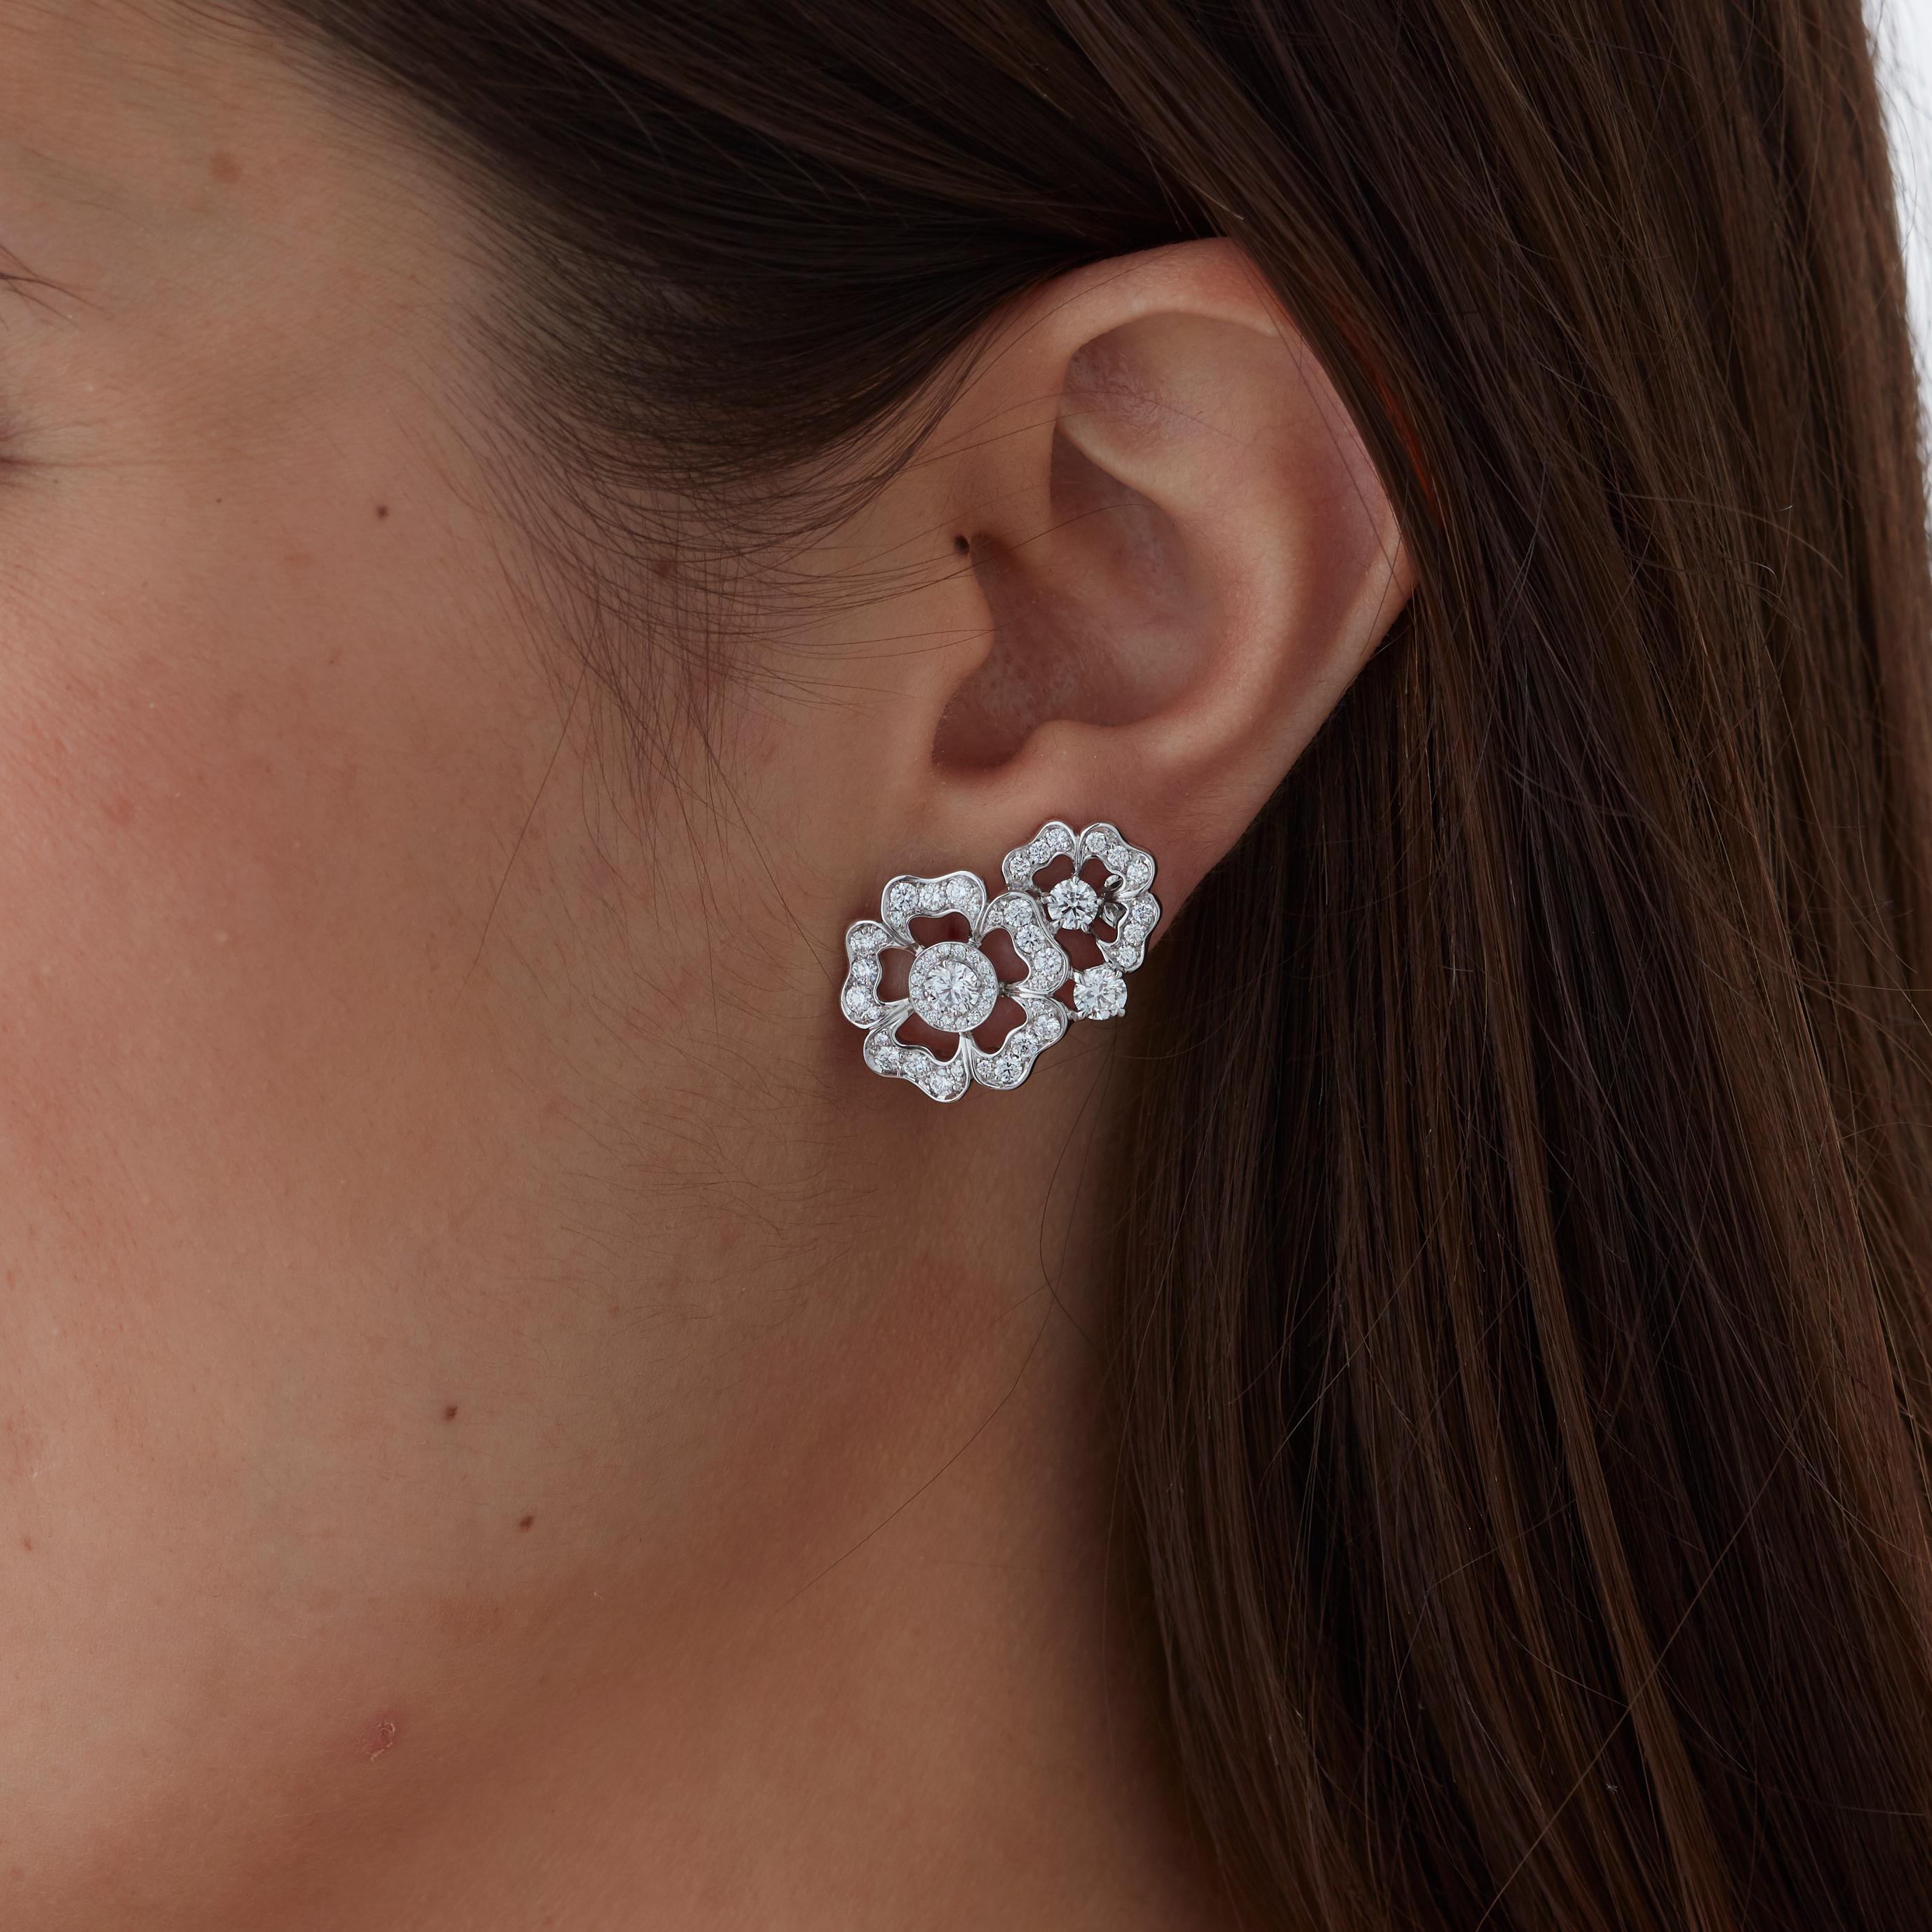 A House of Garrard 18 karat pair of white gold ear climbers from the Tudor Rose Petal collection set with round white diamonds.

112 round white diamonds weighing 2.09cts
Total diamond weight: 2.09cts                                                 